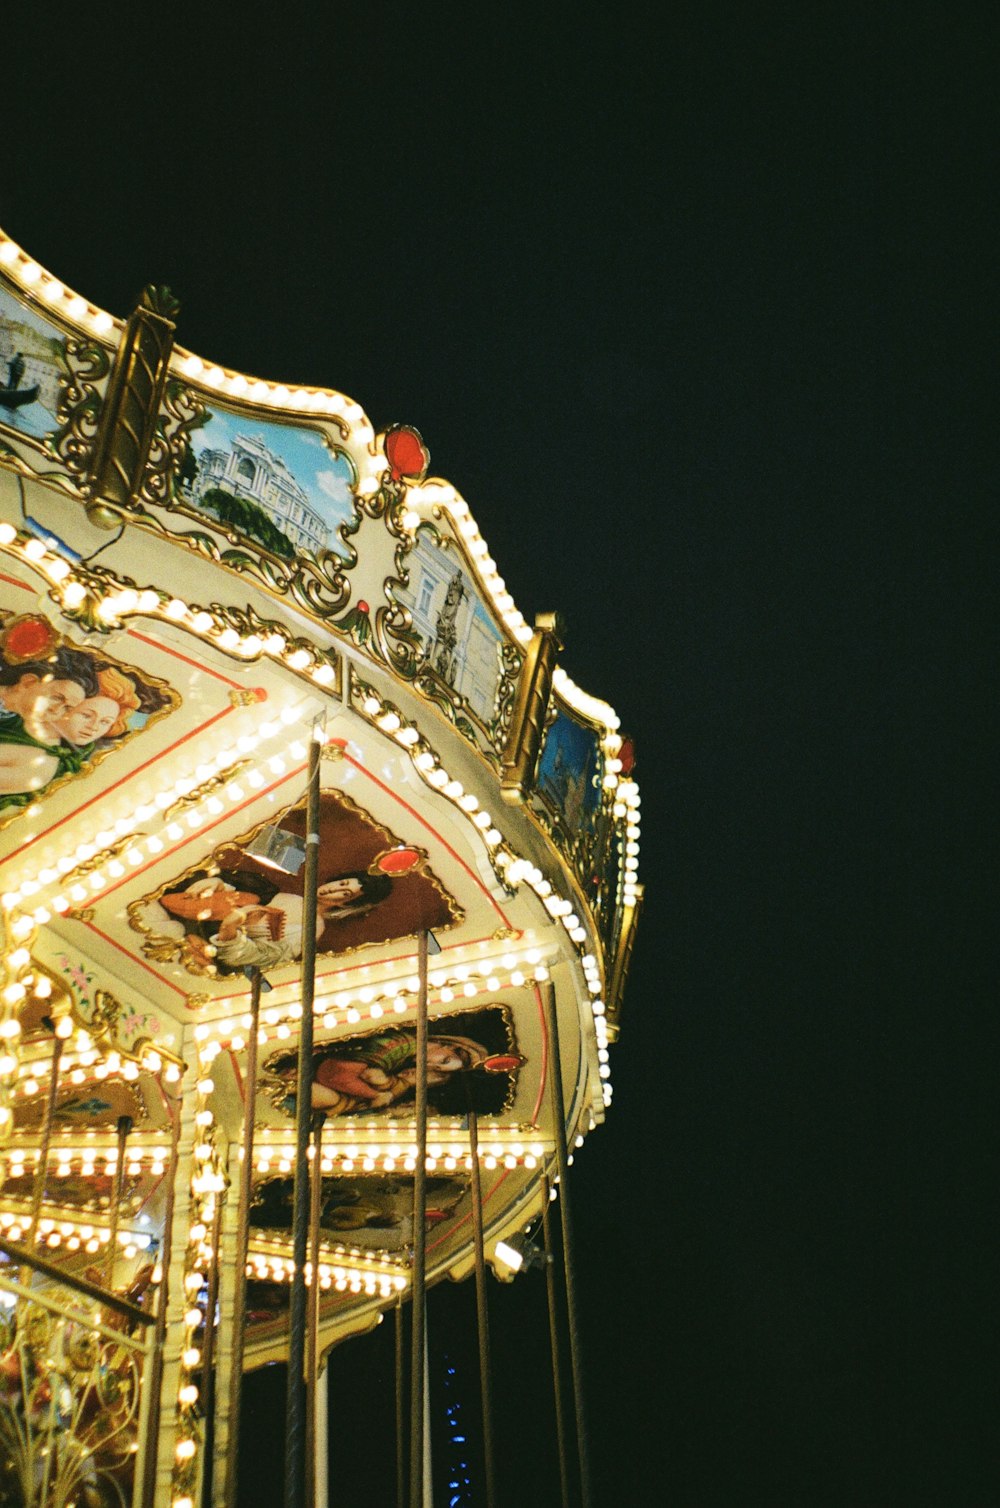 a close up of a merry go round at night